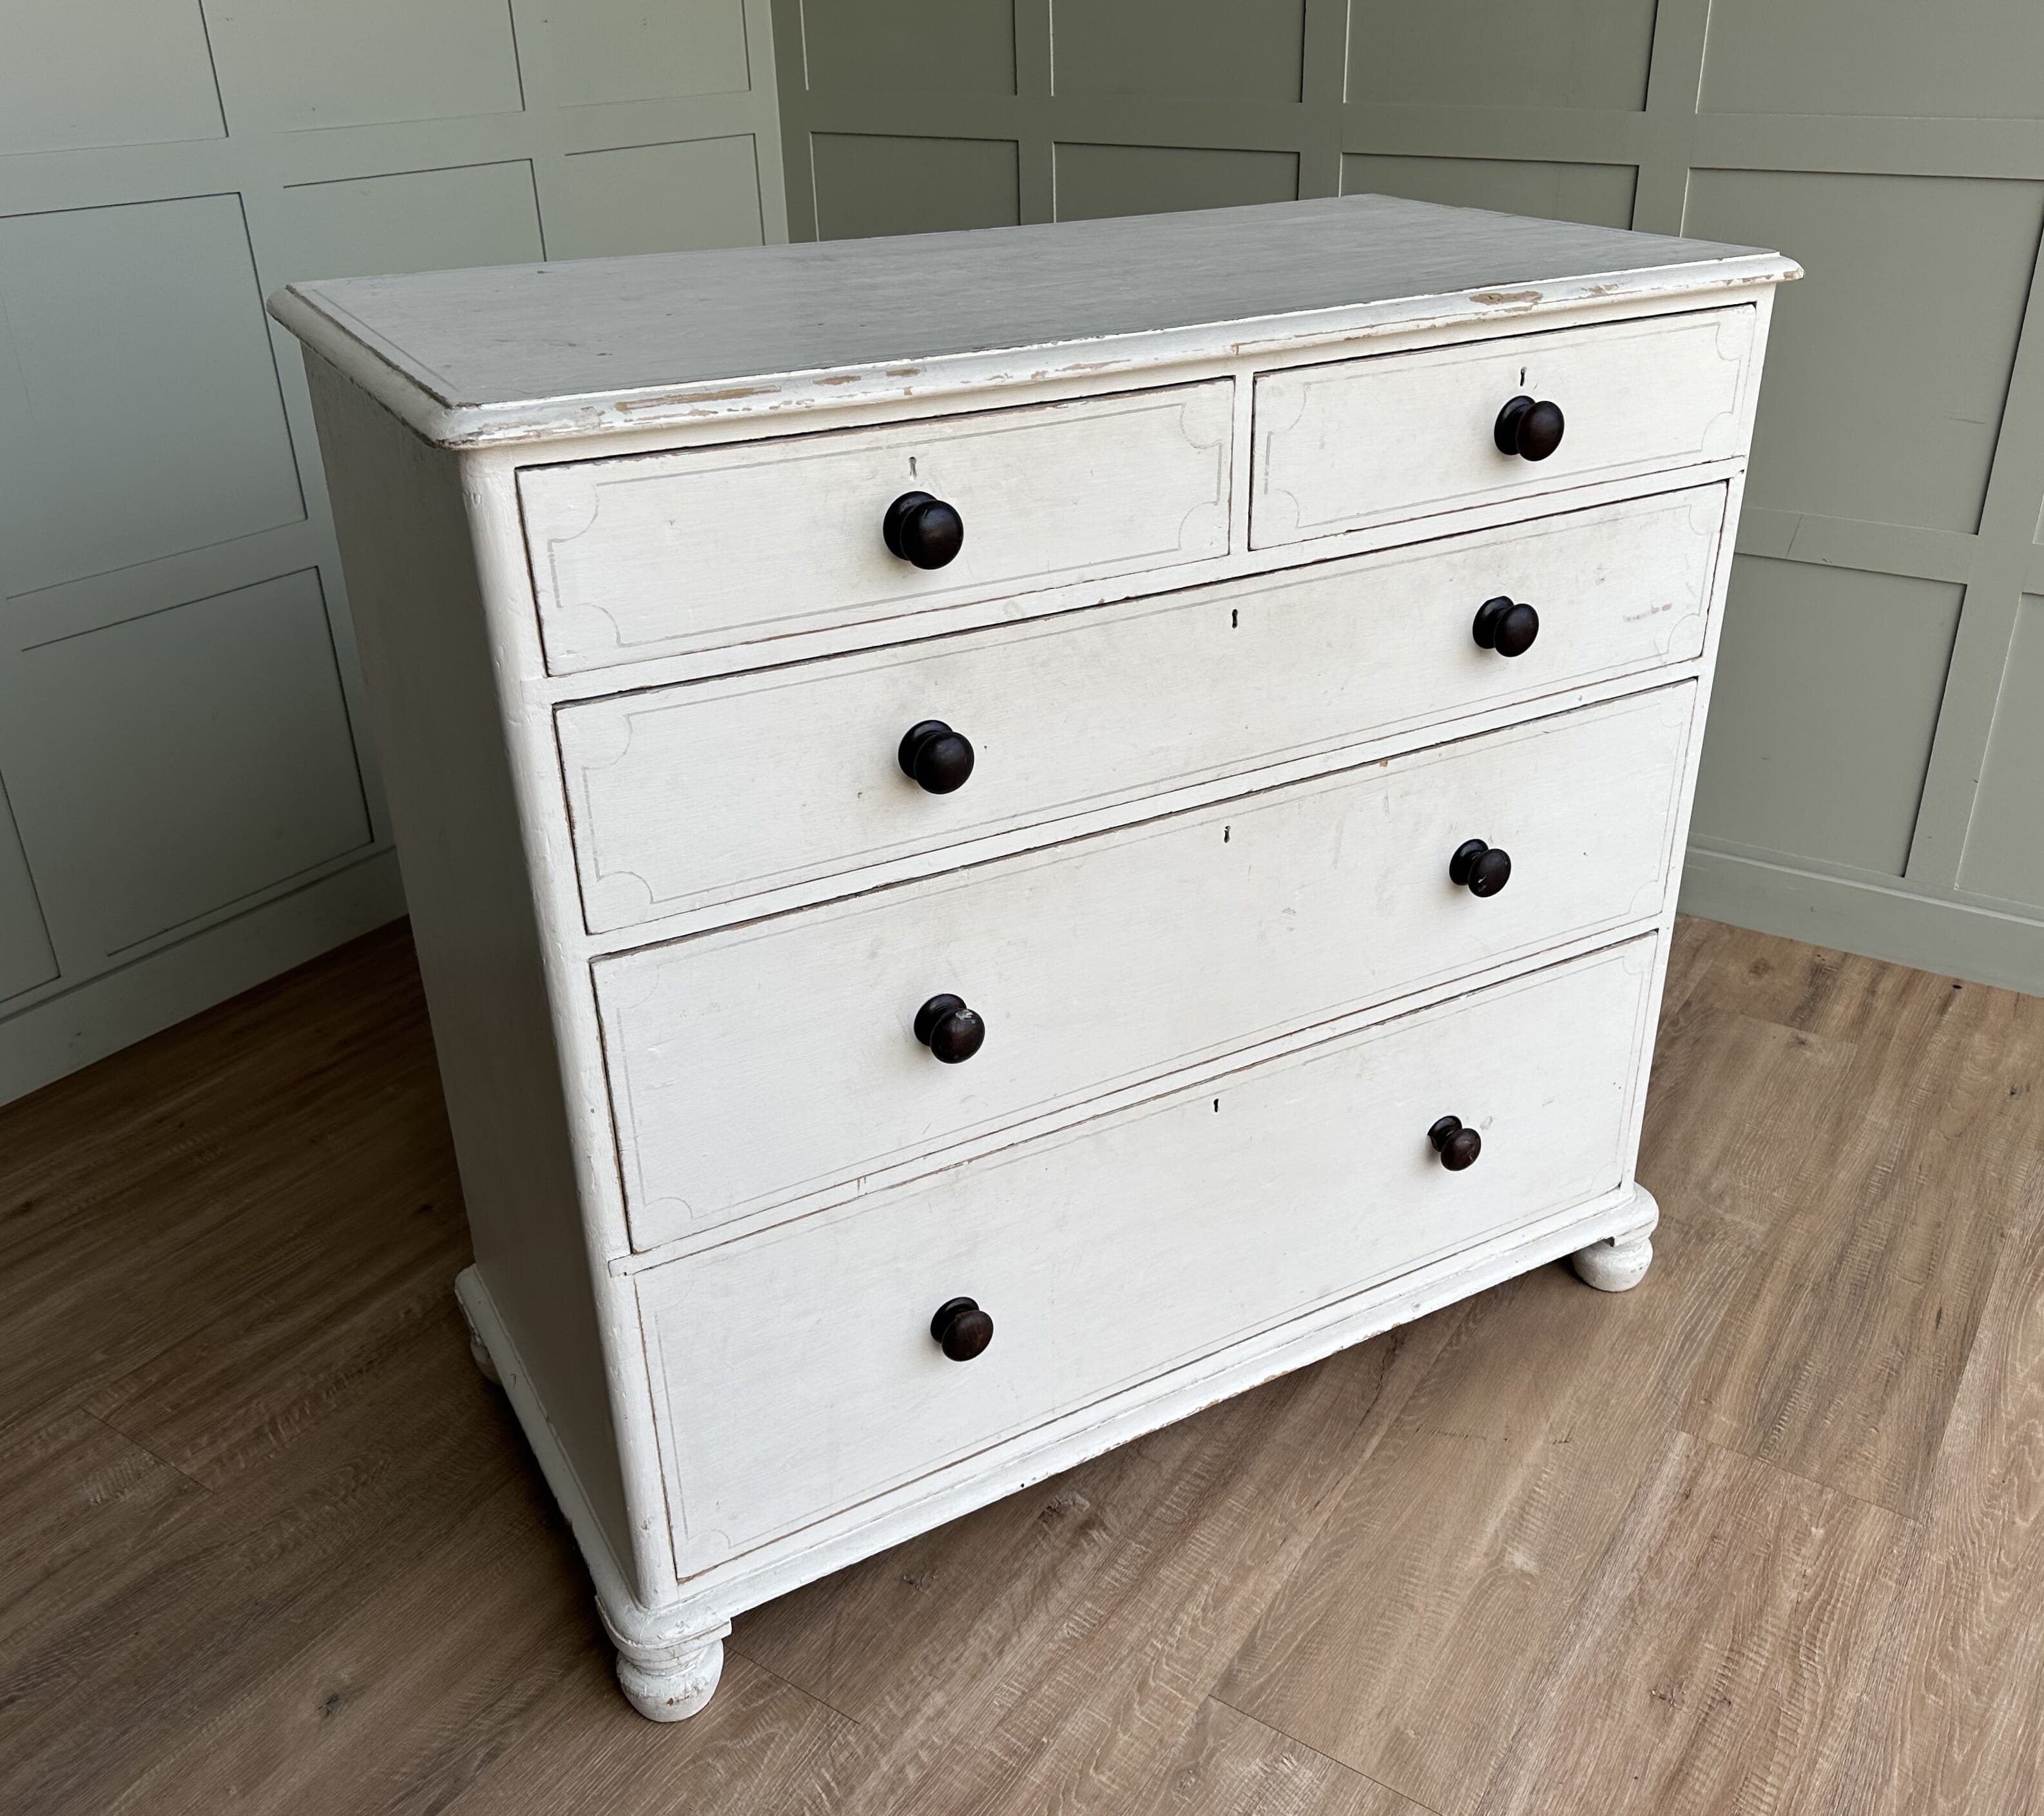 UKAA Have For Sale Antique Chest of Drawers